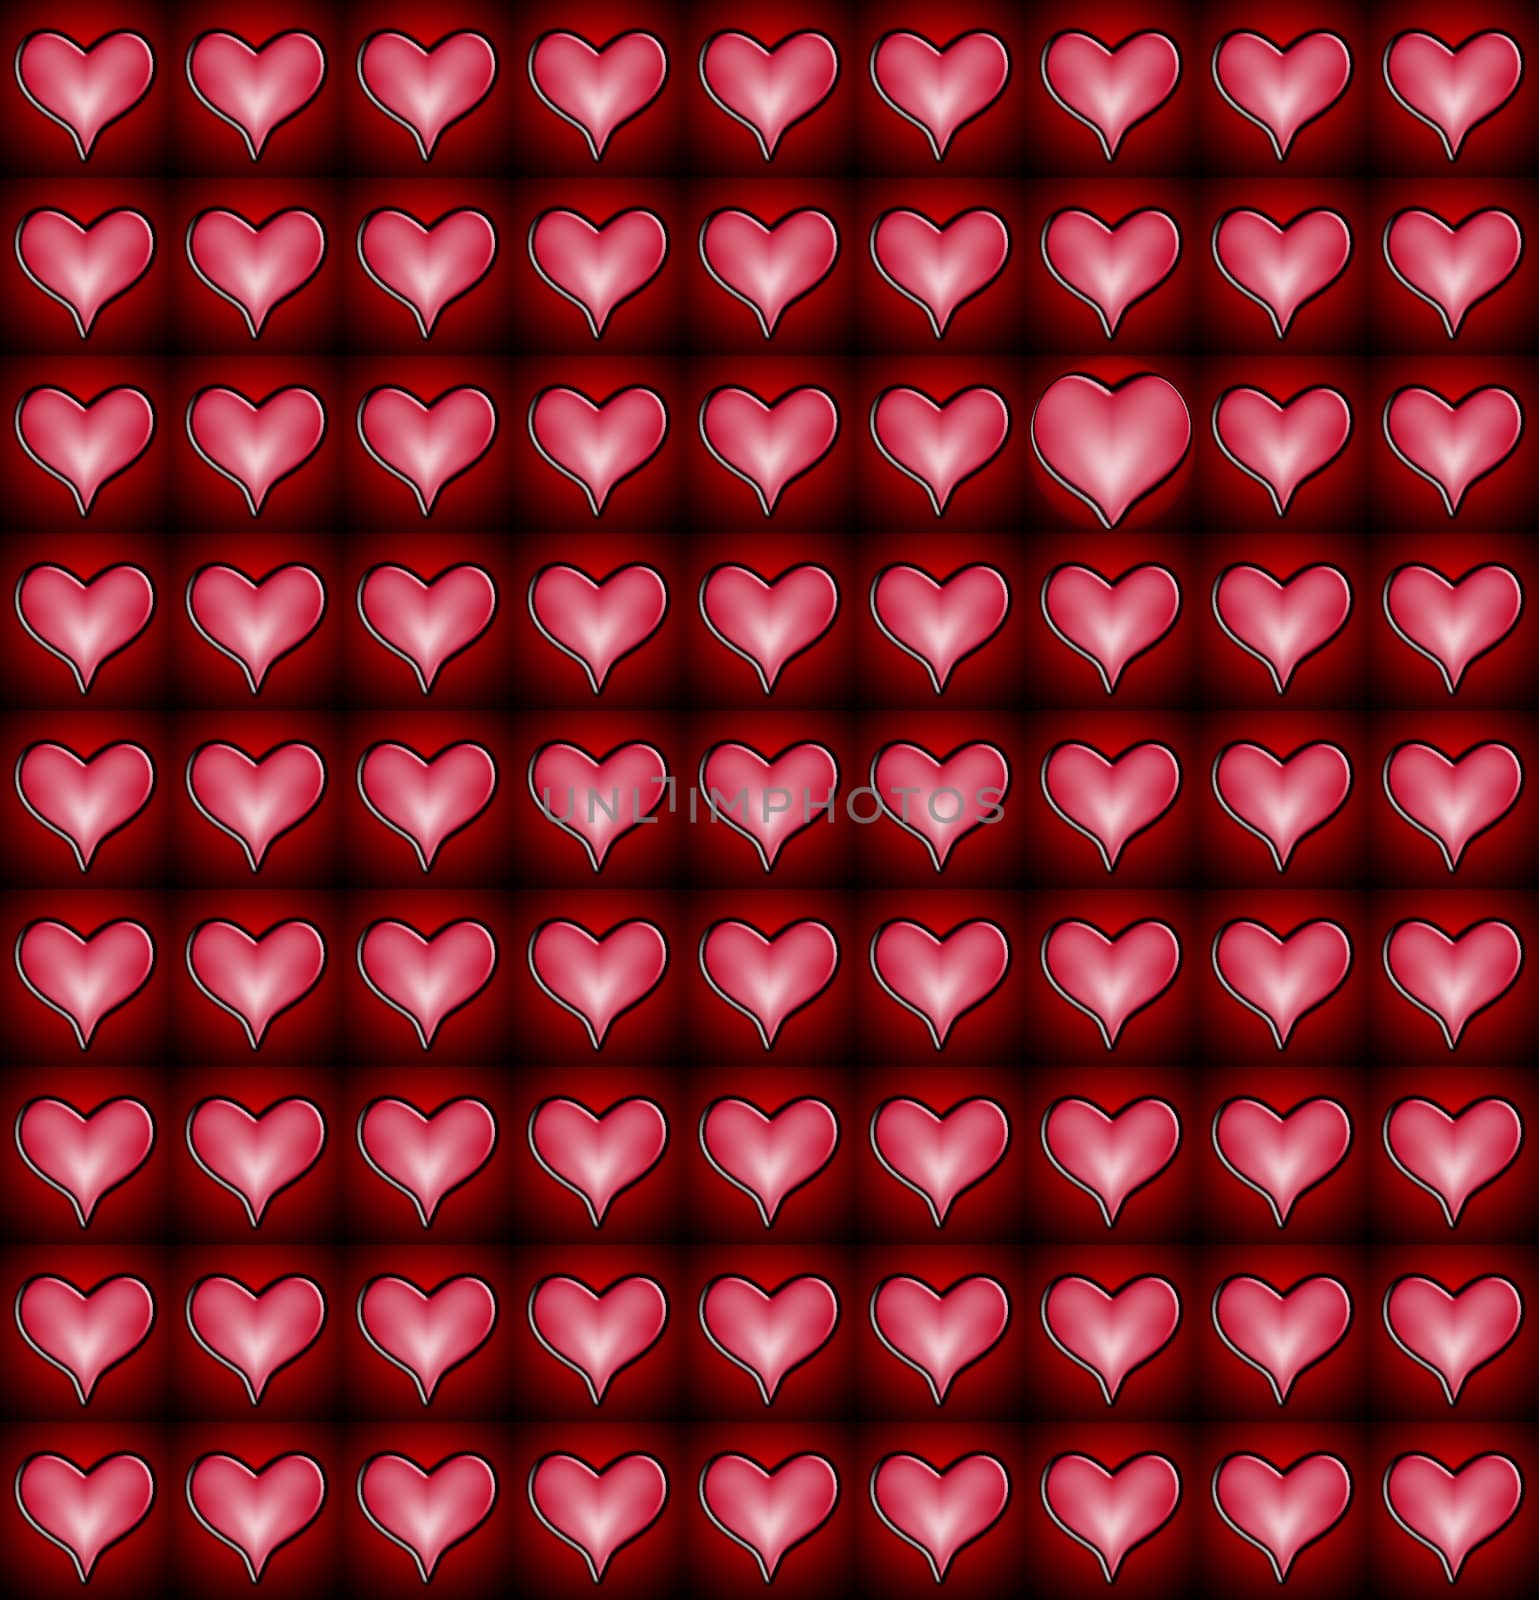 A pattern of love hearts with an odd one within the pattern.